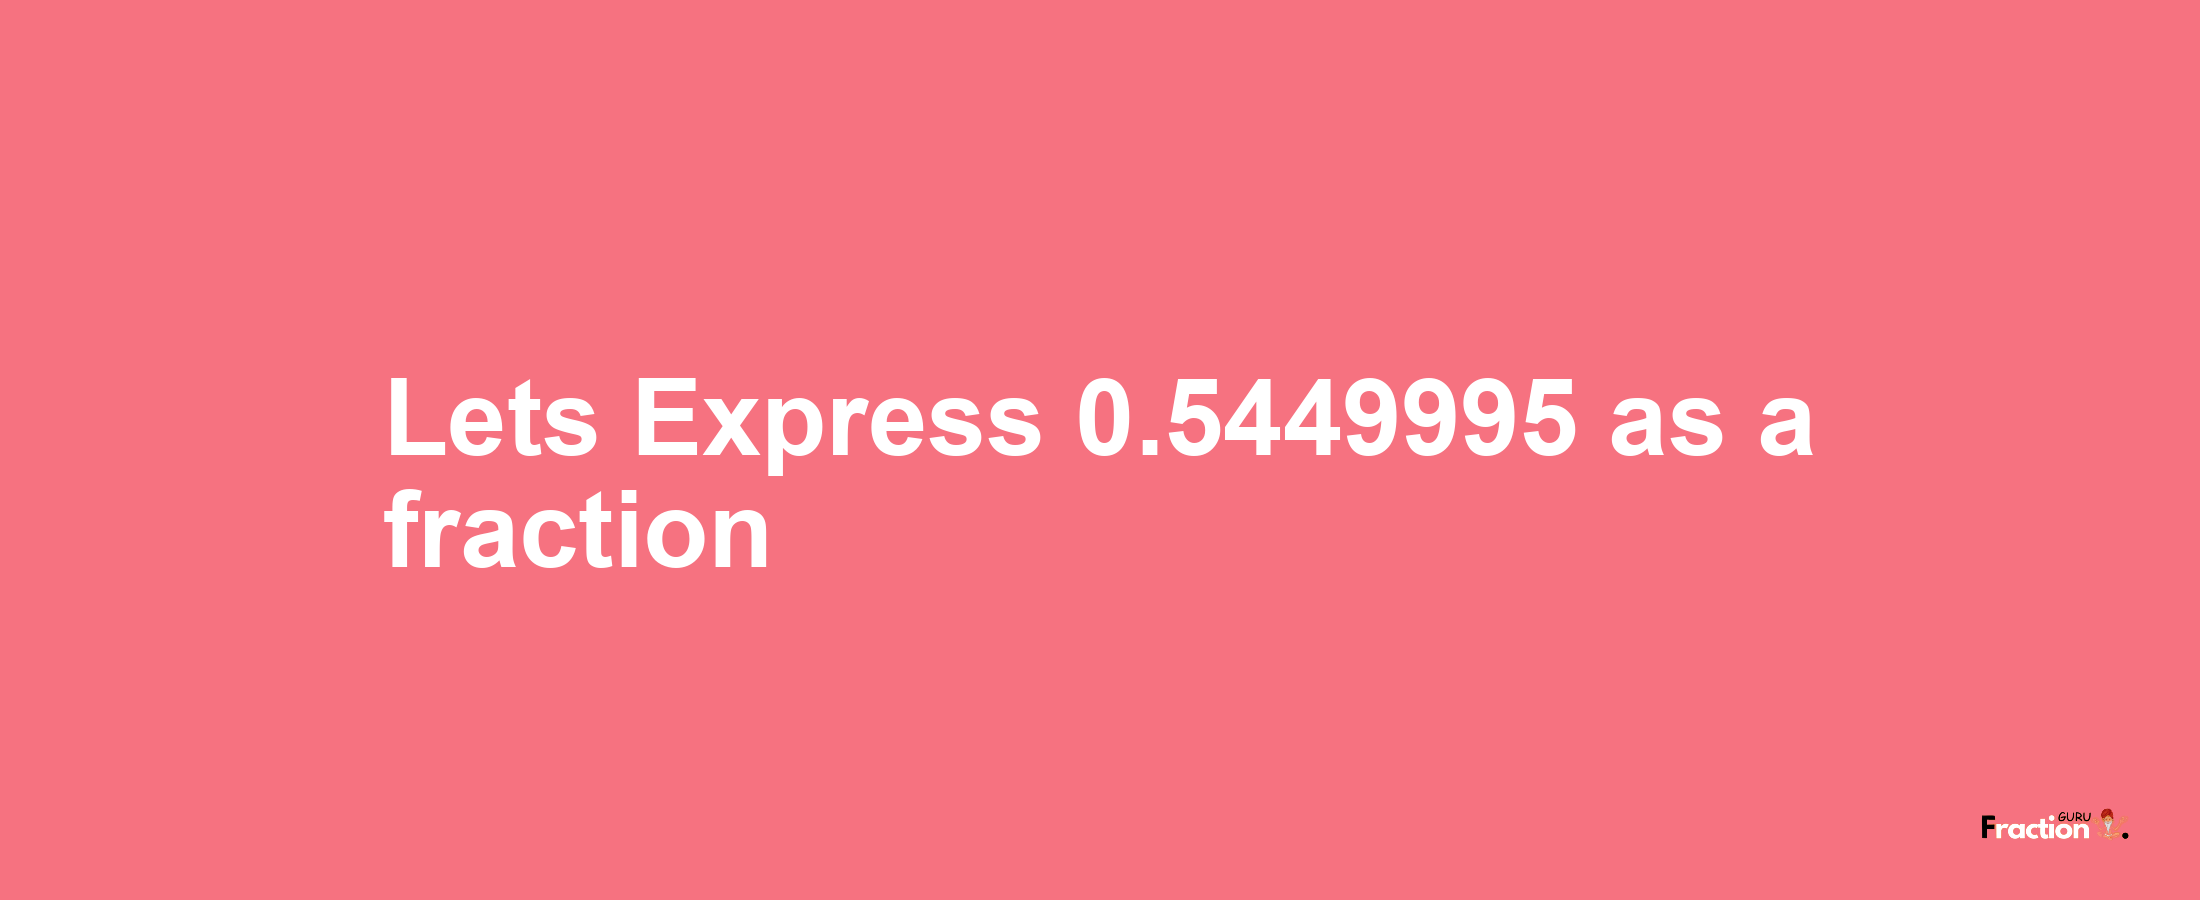 Lets Express 0.5449995 as afraction